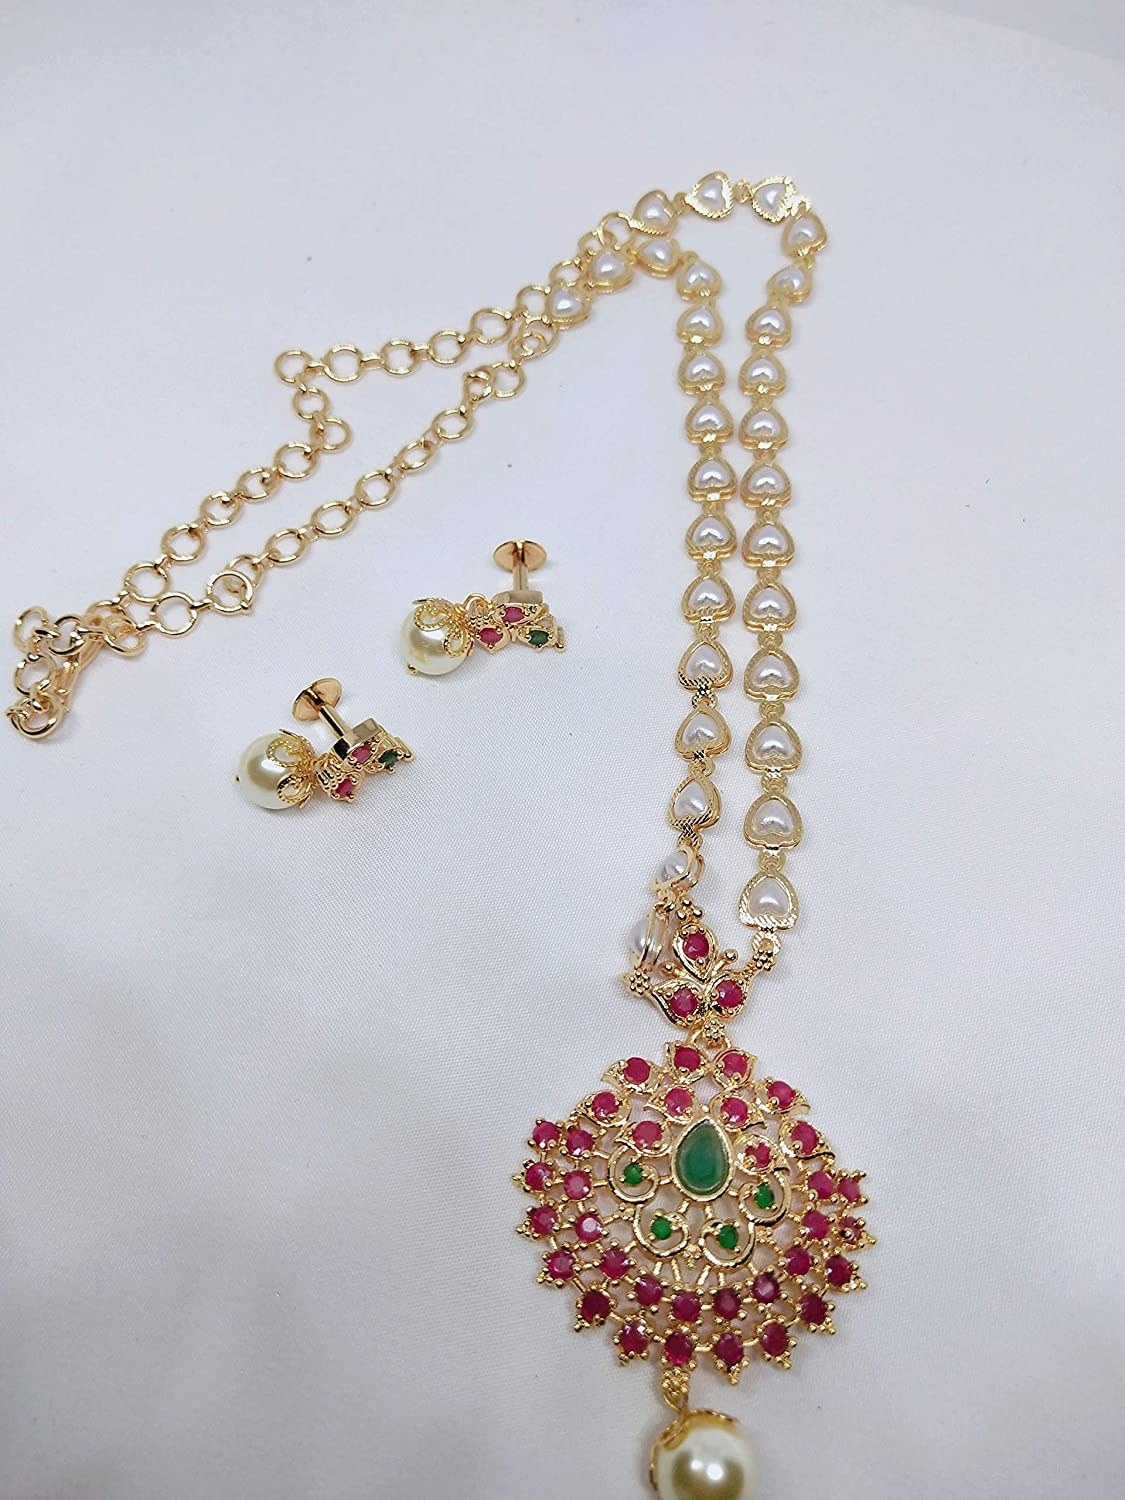 A pendant and earring set